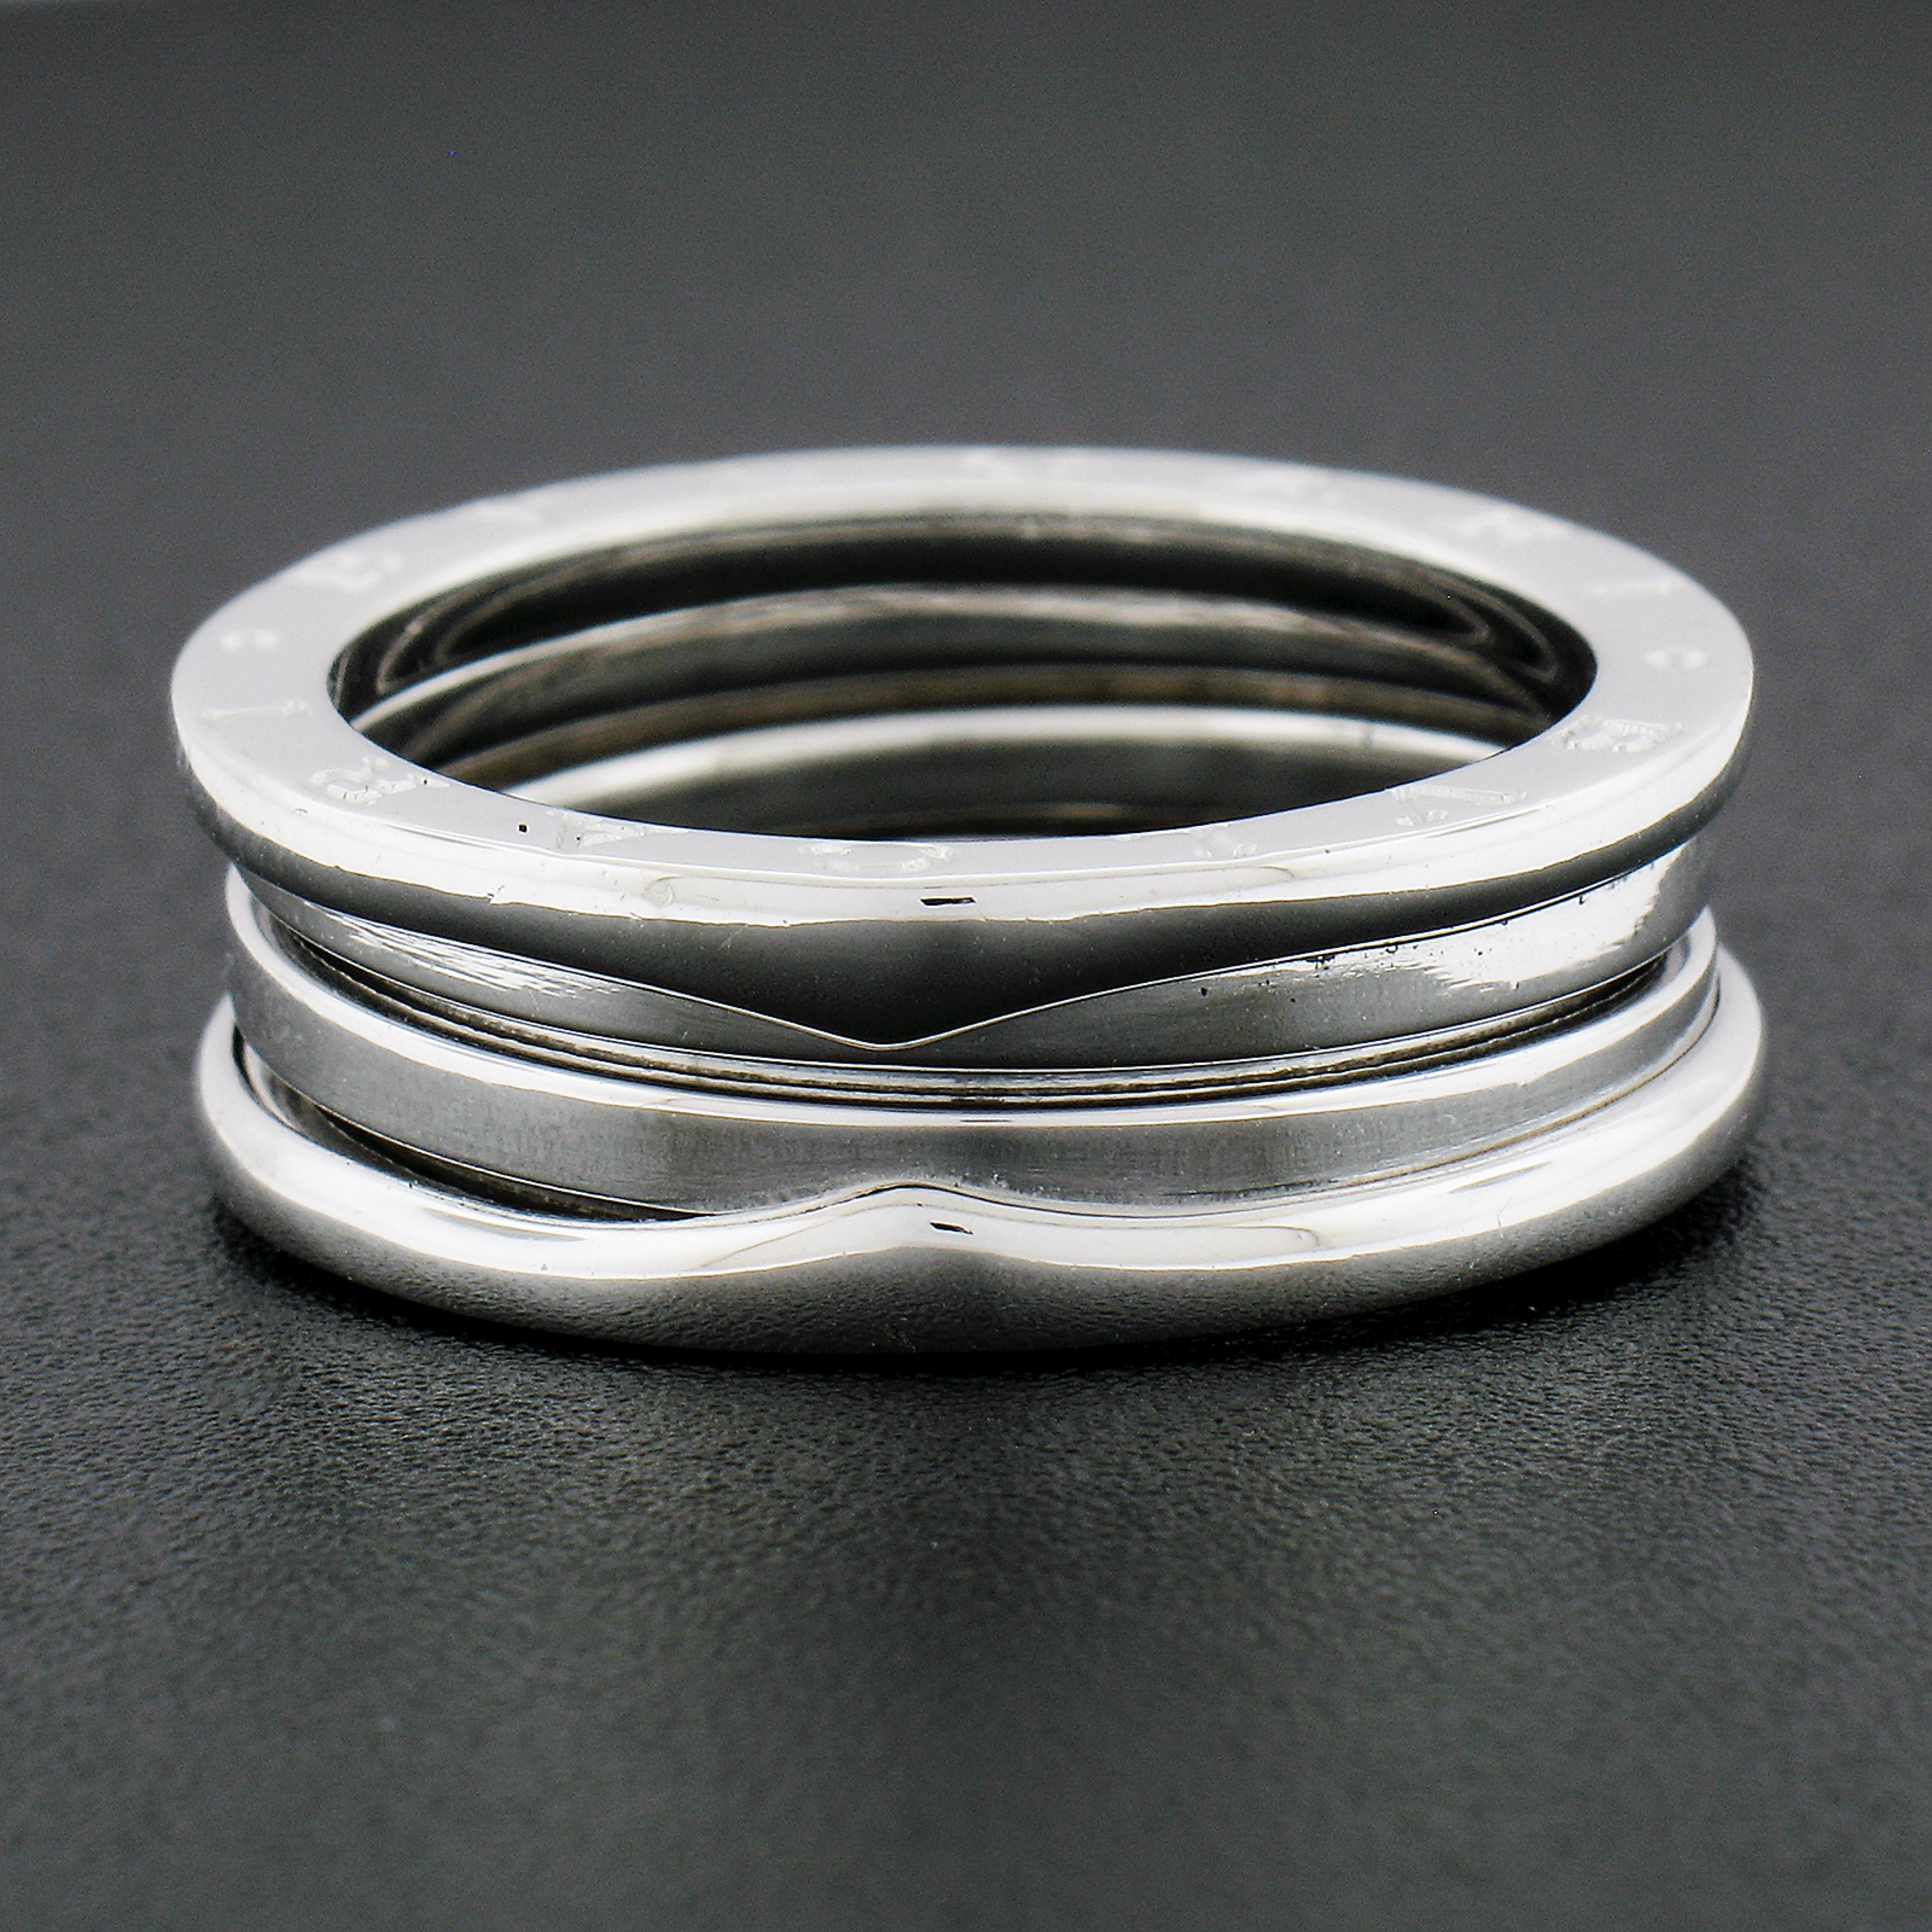 76 mm ring size